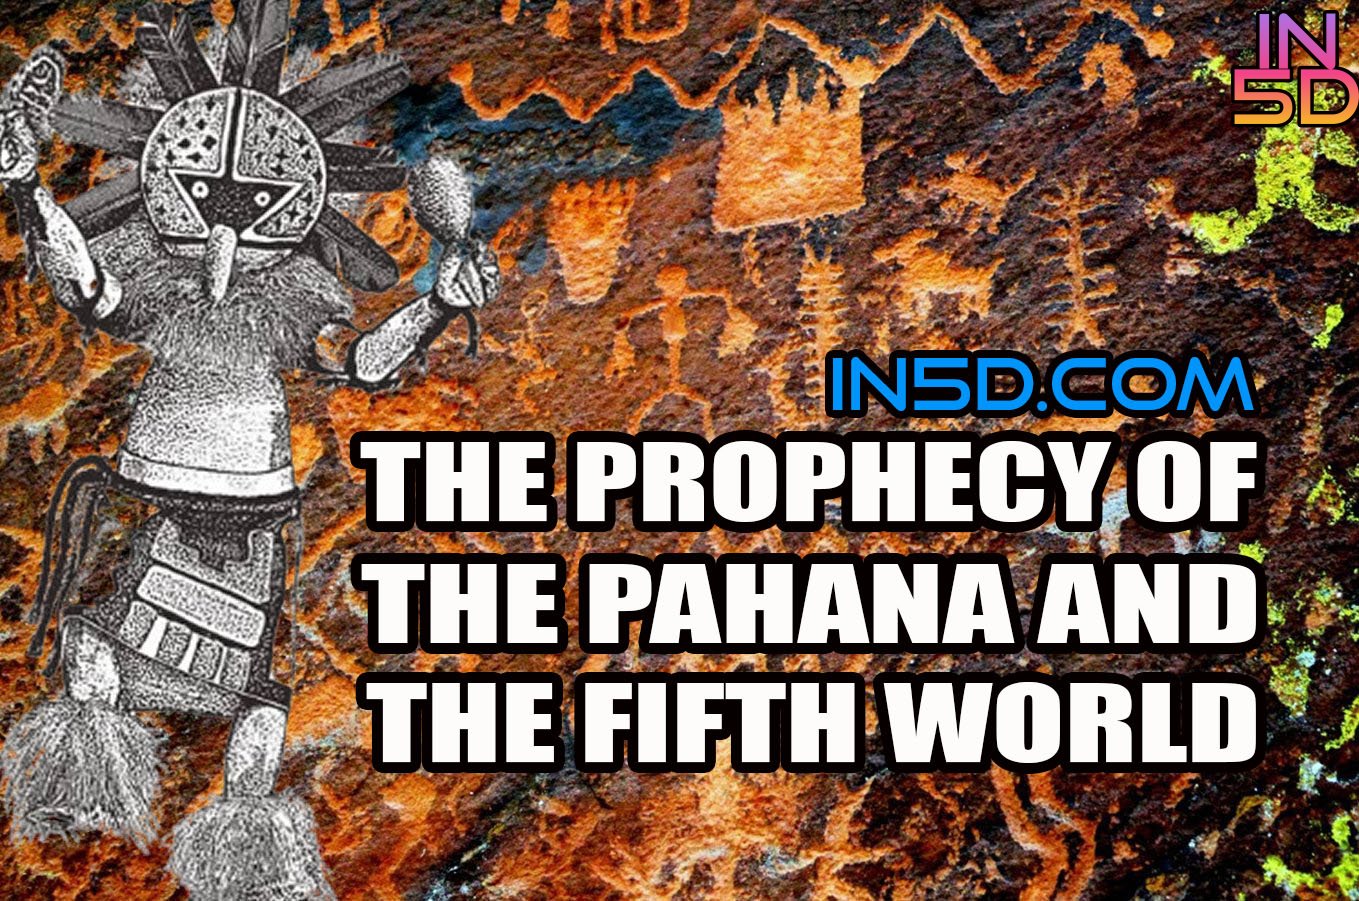 The Prophecy of the Pahana and the Fifth World